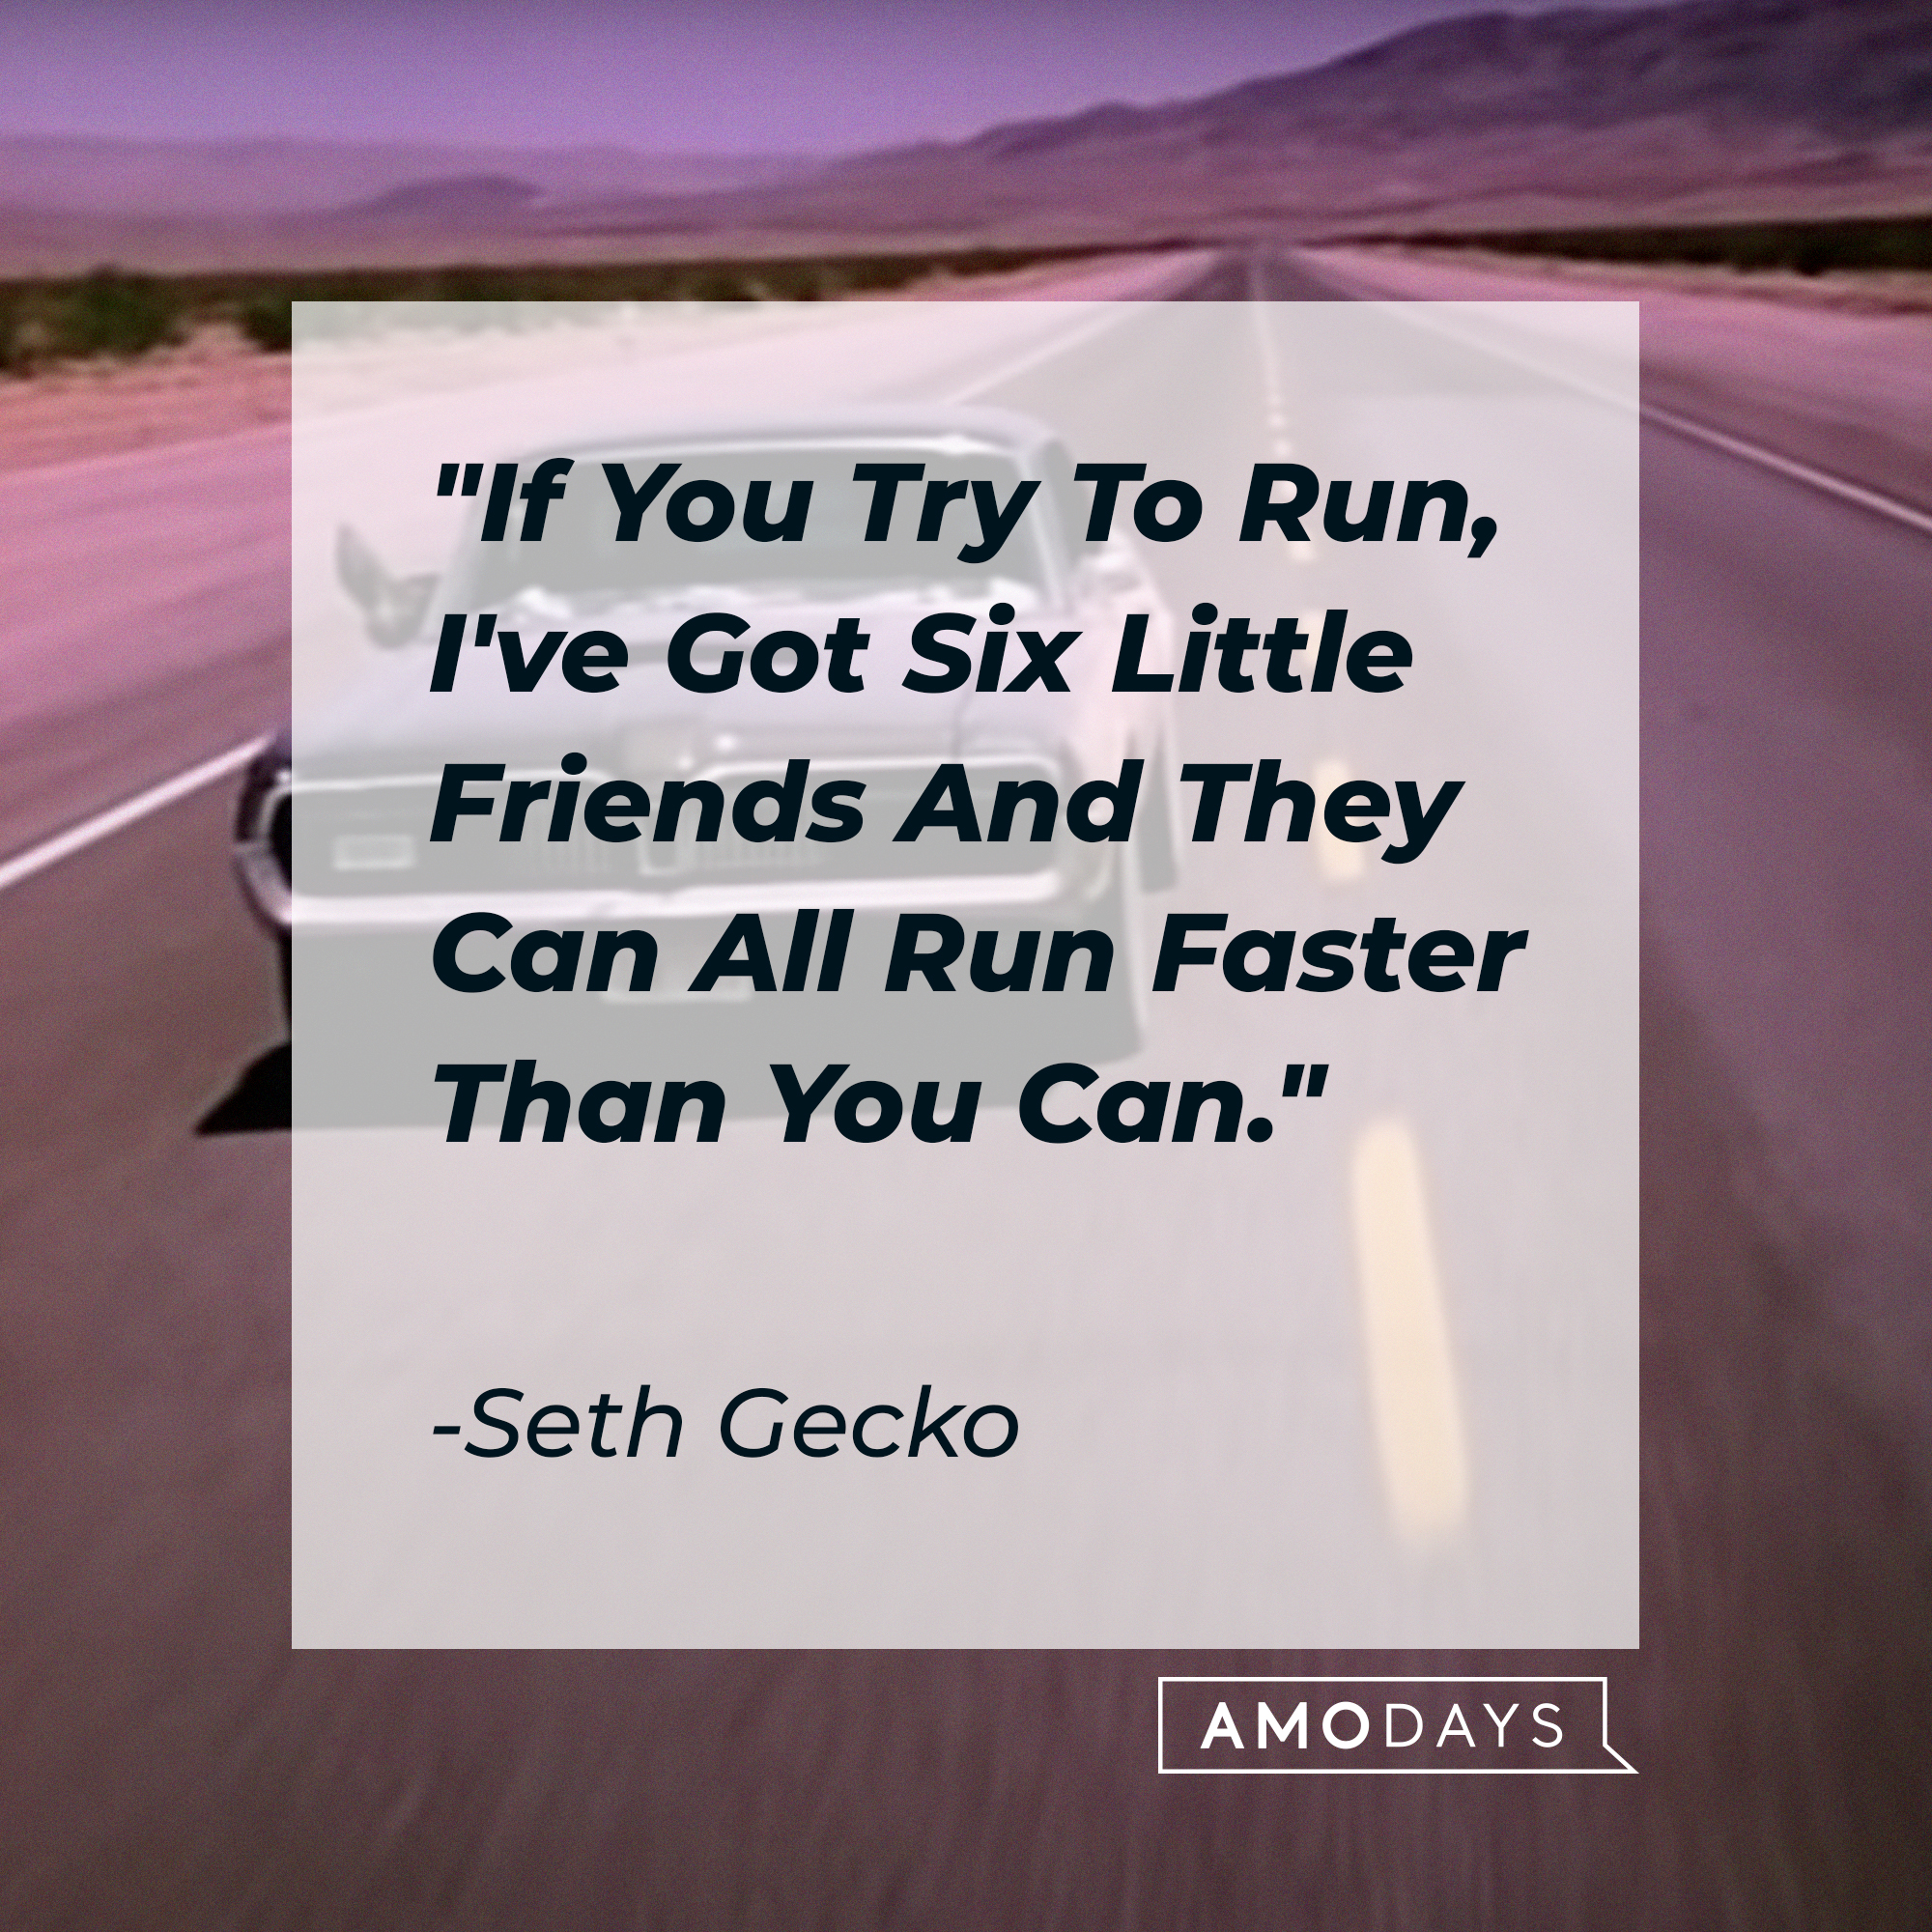 Seth Gecko's quote: "If You Try To Run, I've Got Six Little Friends And They Can All Run Faster Than You Can." | Source: youtube.com/miramax